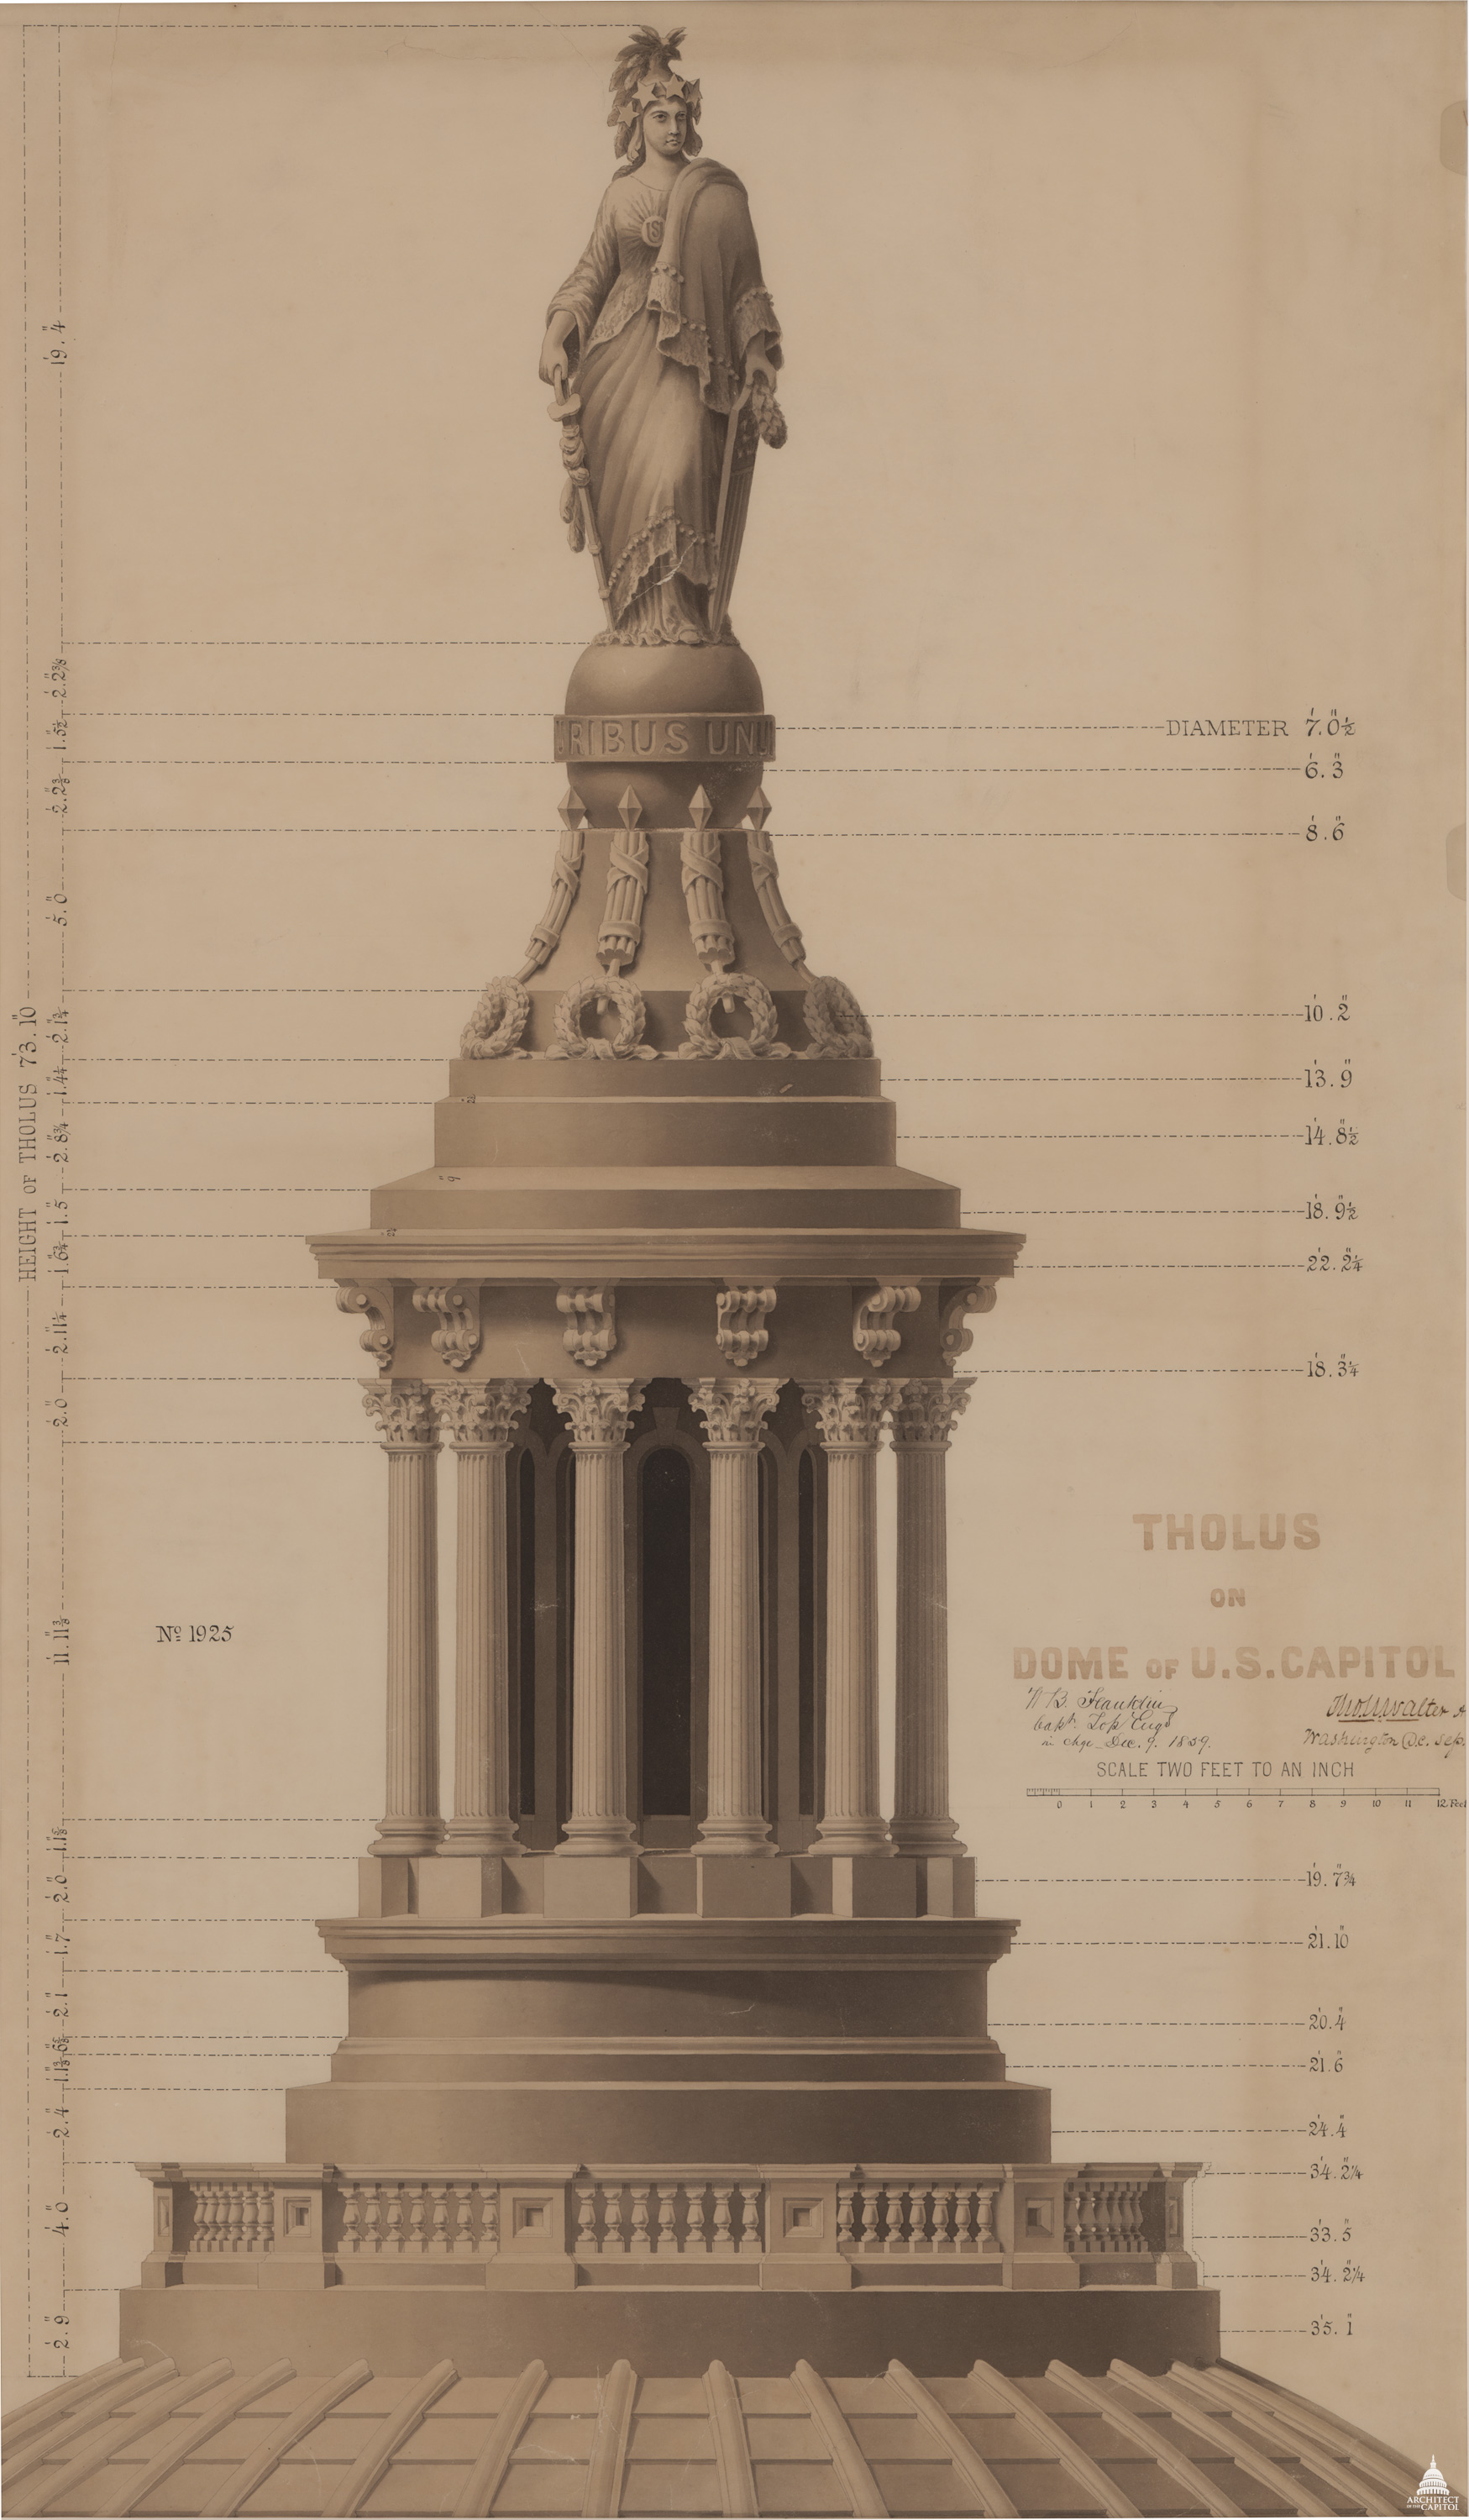 A detailed diagram of the Statue of Freedom